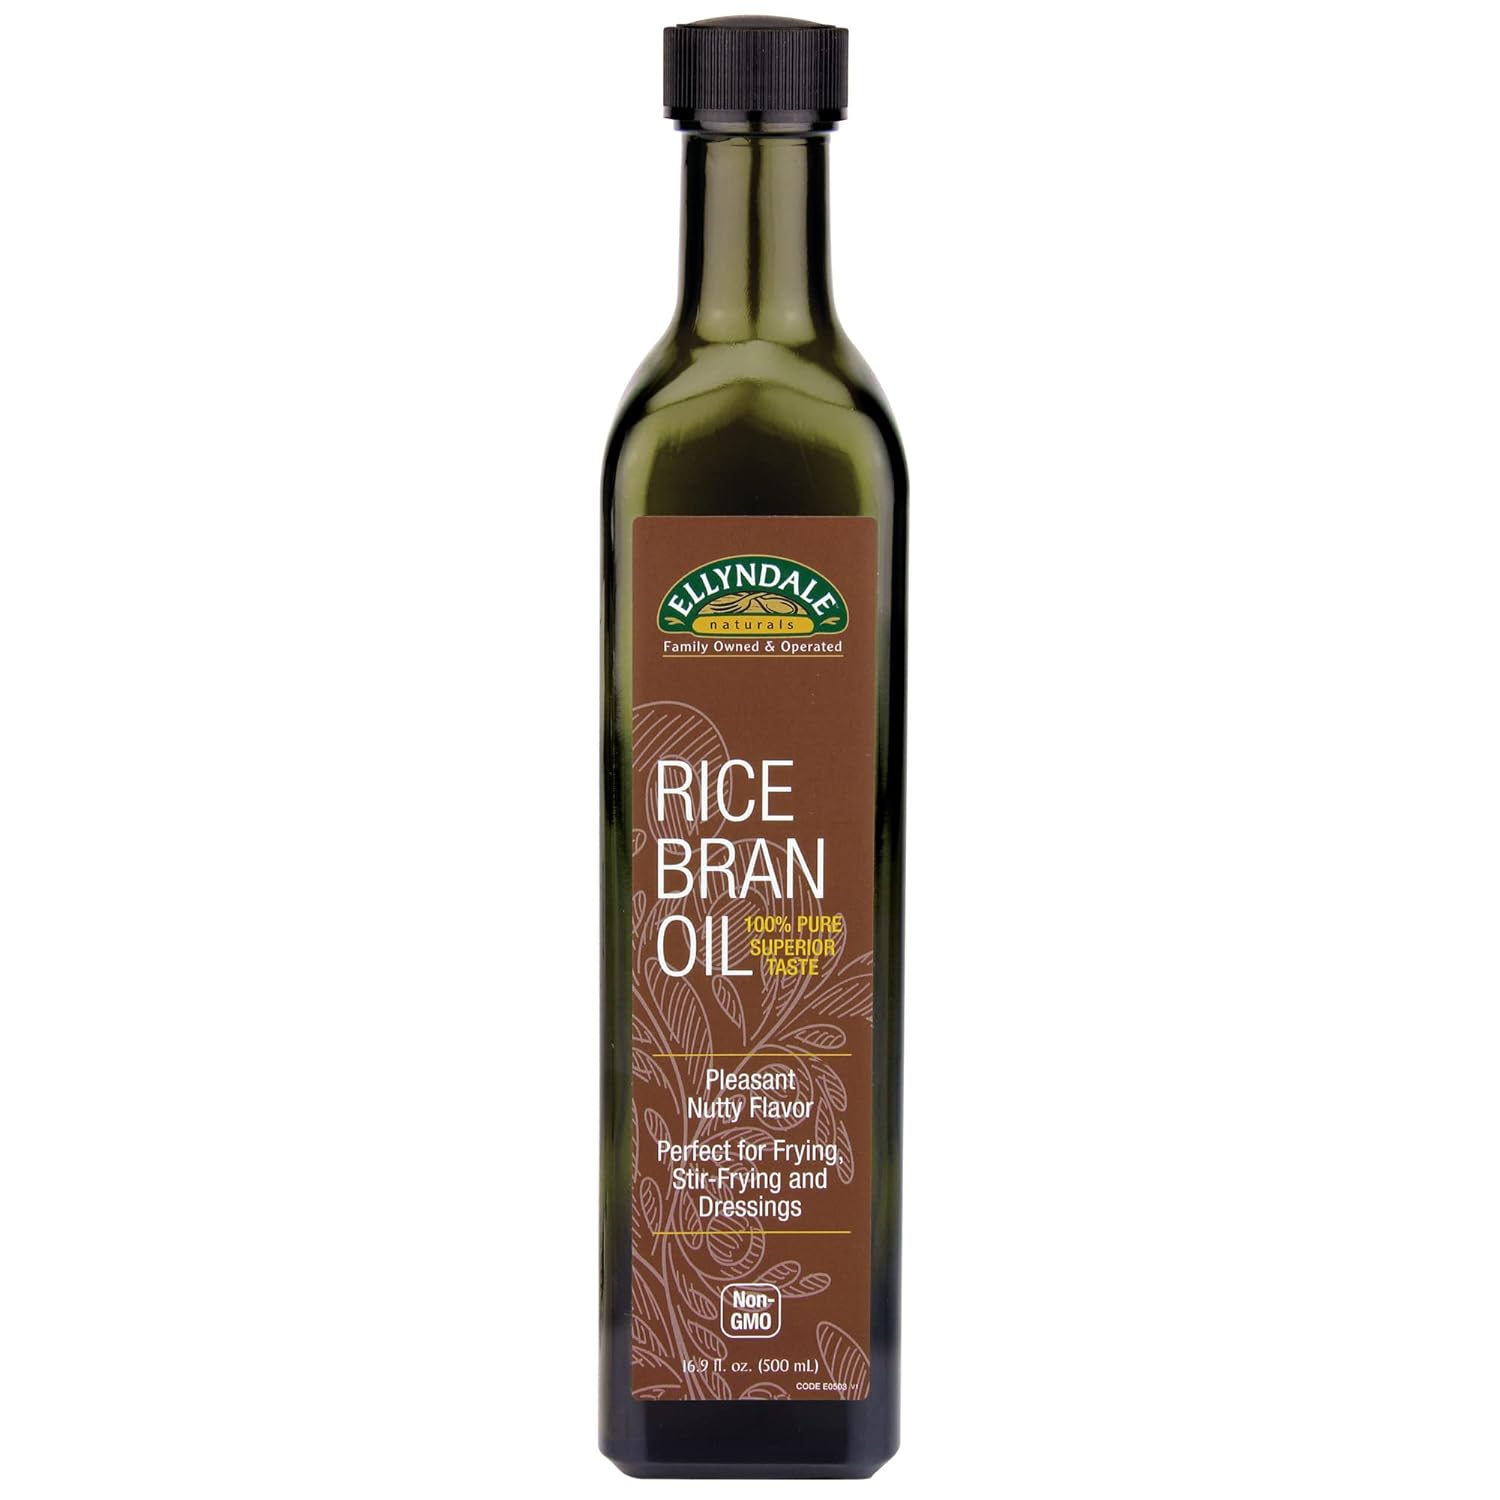 NOW Foods, Rice Bran Oil, 100% Pure for Superior Taste, Pleasant Nutty Flavor, Perfect for Frying, Stir-Fry, and Dressings, Certified Non-GMO, 16.9-Ounce